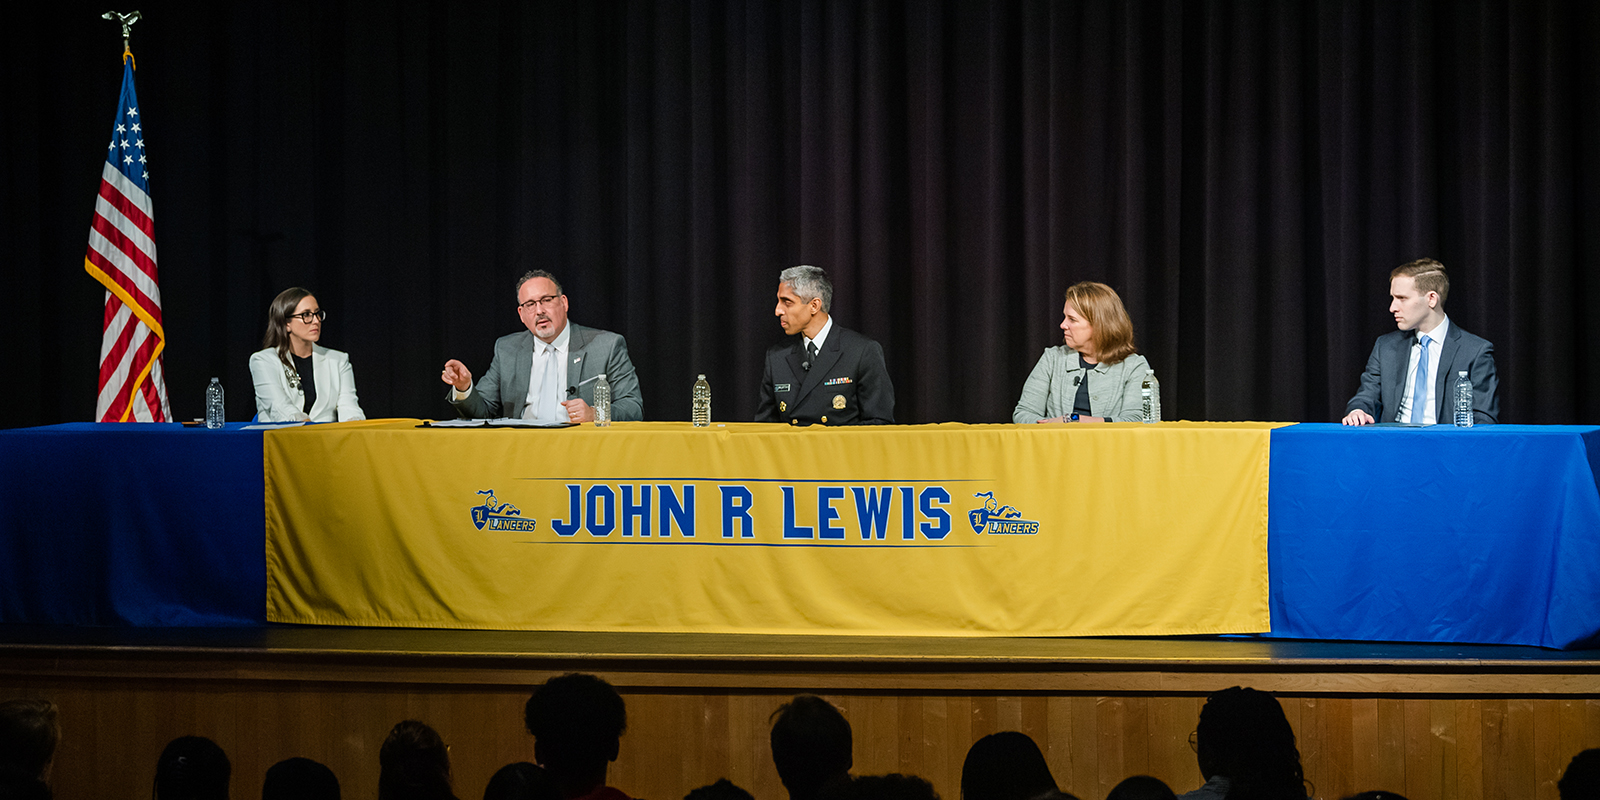 Panelists, including U.S. Education Sec. Cardona and U.S. Surgeon General Murthy, discuss the need for support in schools to address a mental health crisis occurring in teens.